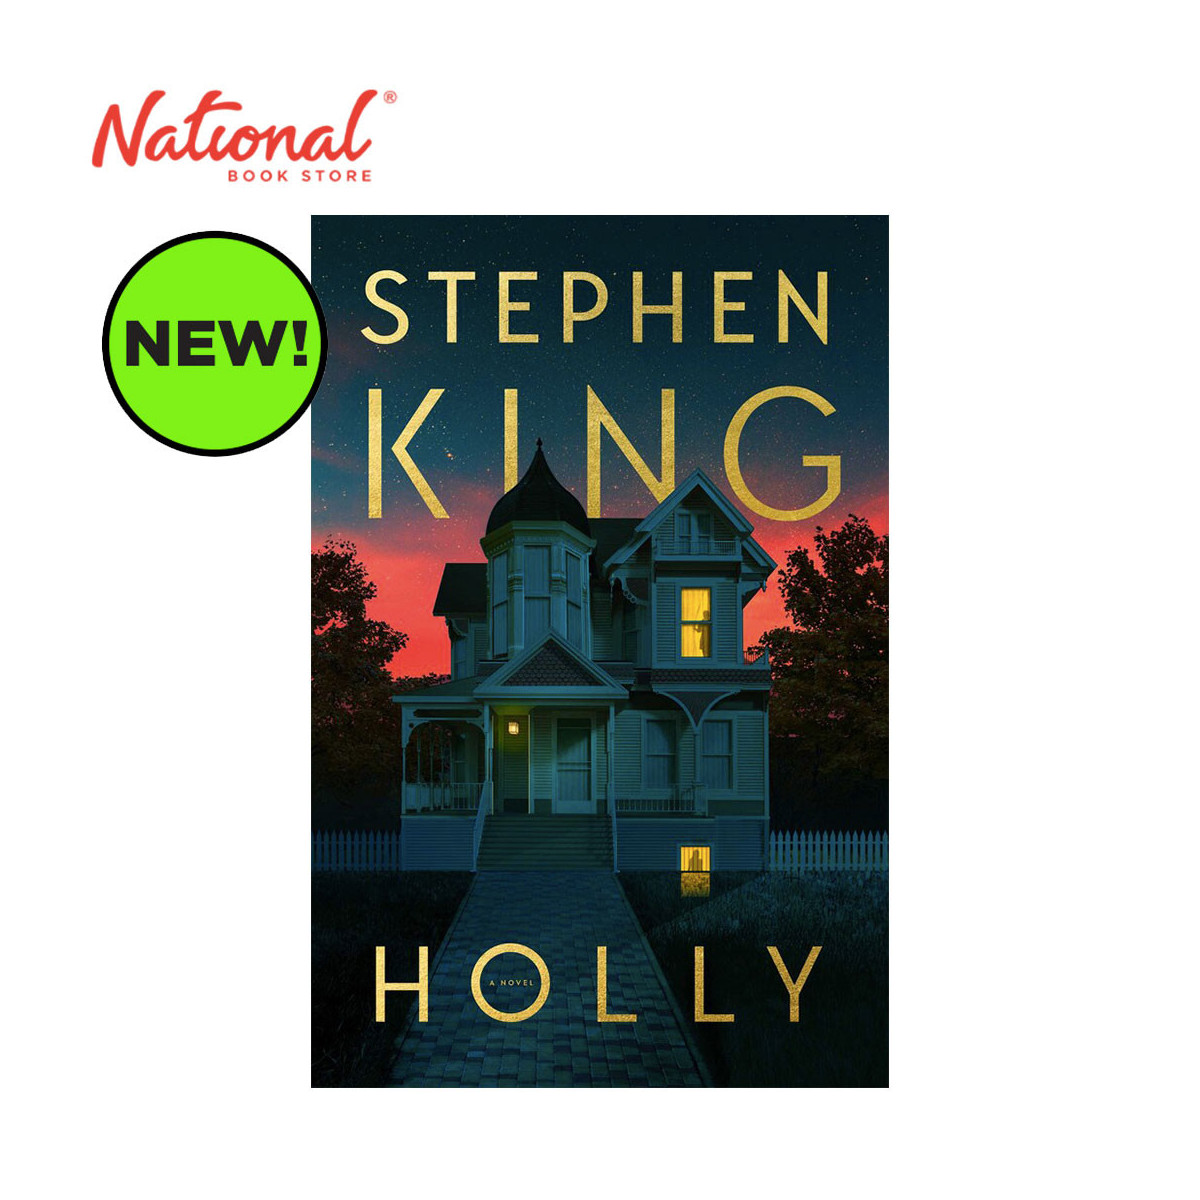 Holly by Stephen King - Hardcover - Sci-Fi, Fantasy & Horror